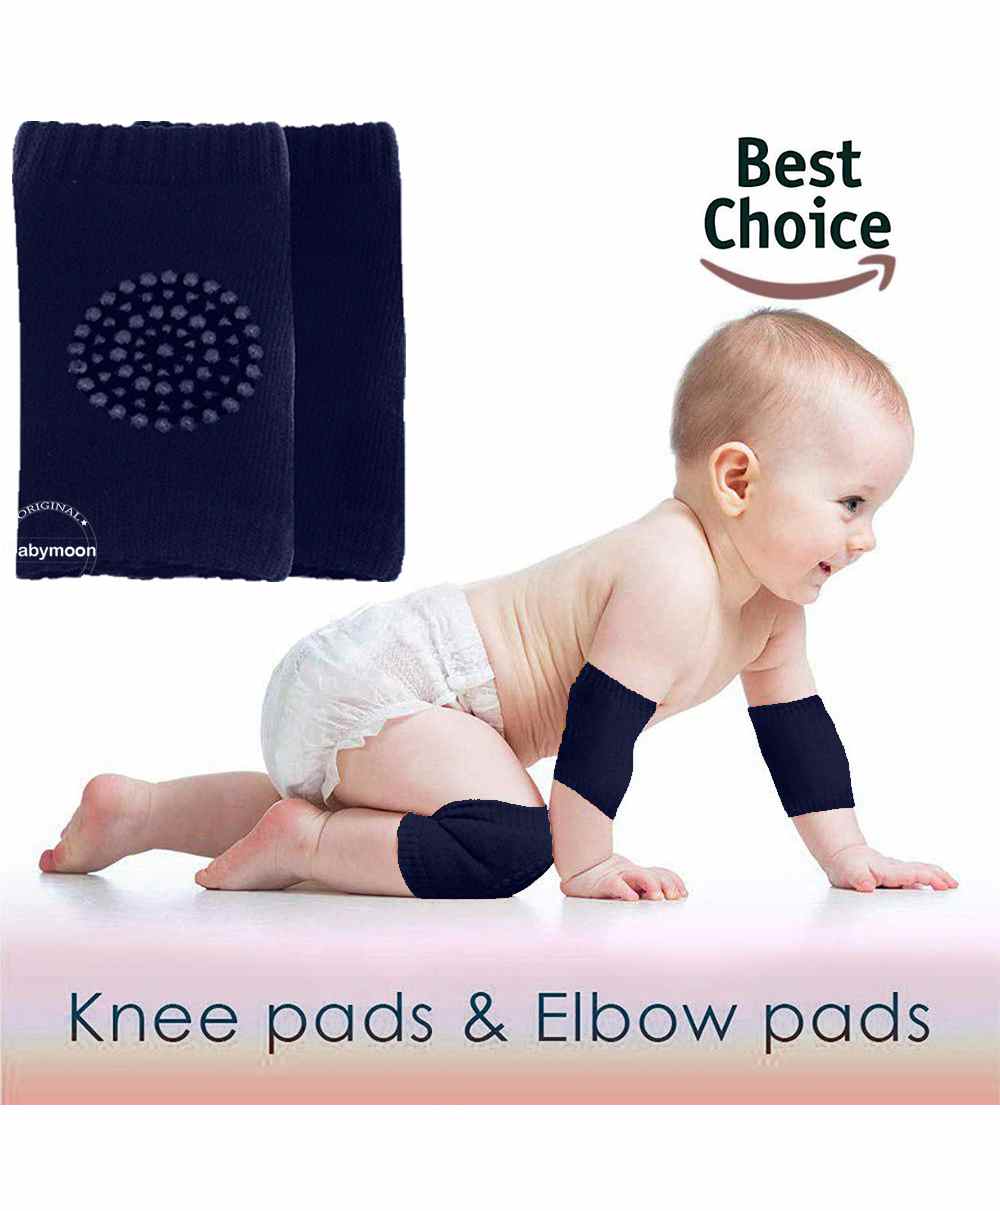 Babymoon Baby Kids Knee Pads AntiSlip Stretchable Knee Cap Elbow Safety - Blue